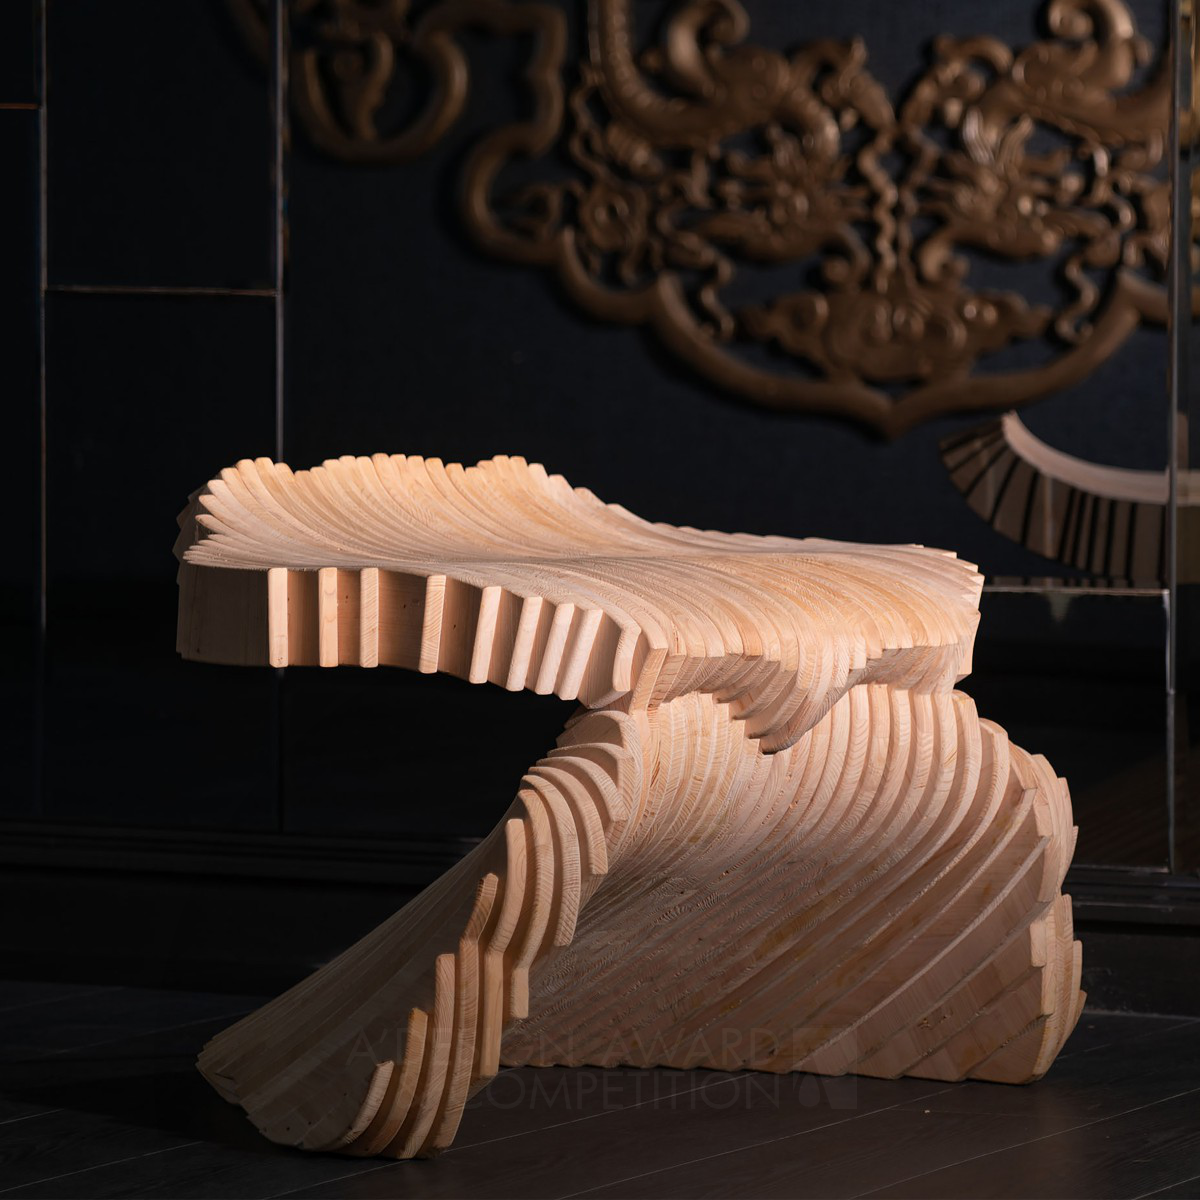 The Fortunate Ruyi Chair: Combining Tradition and Modern Aesthetics